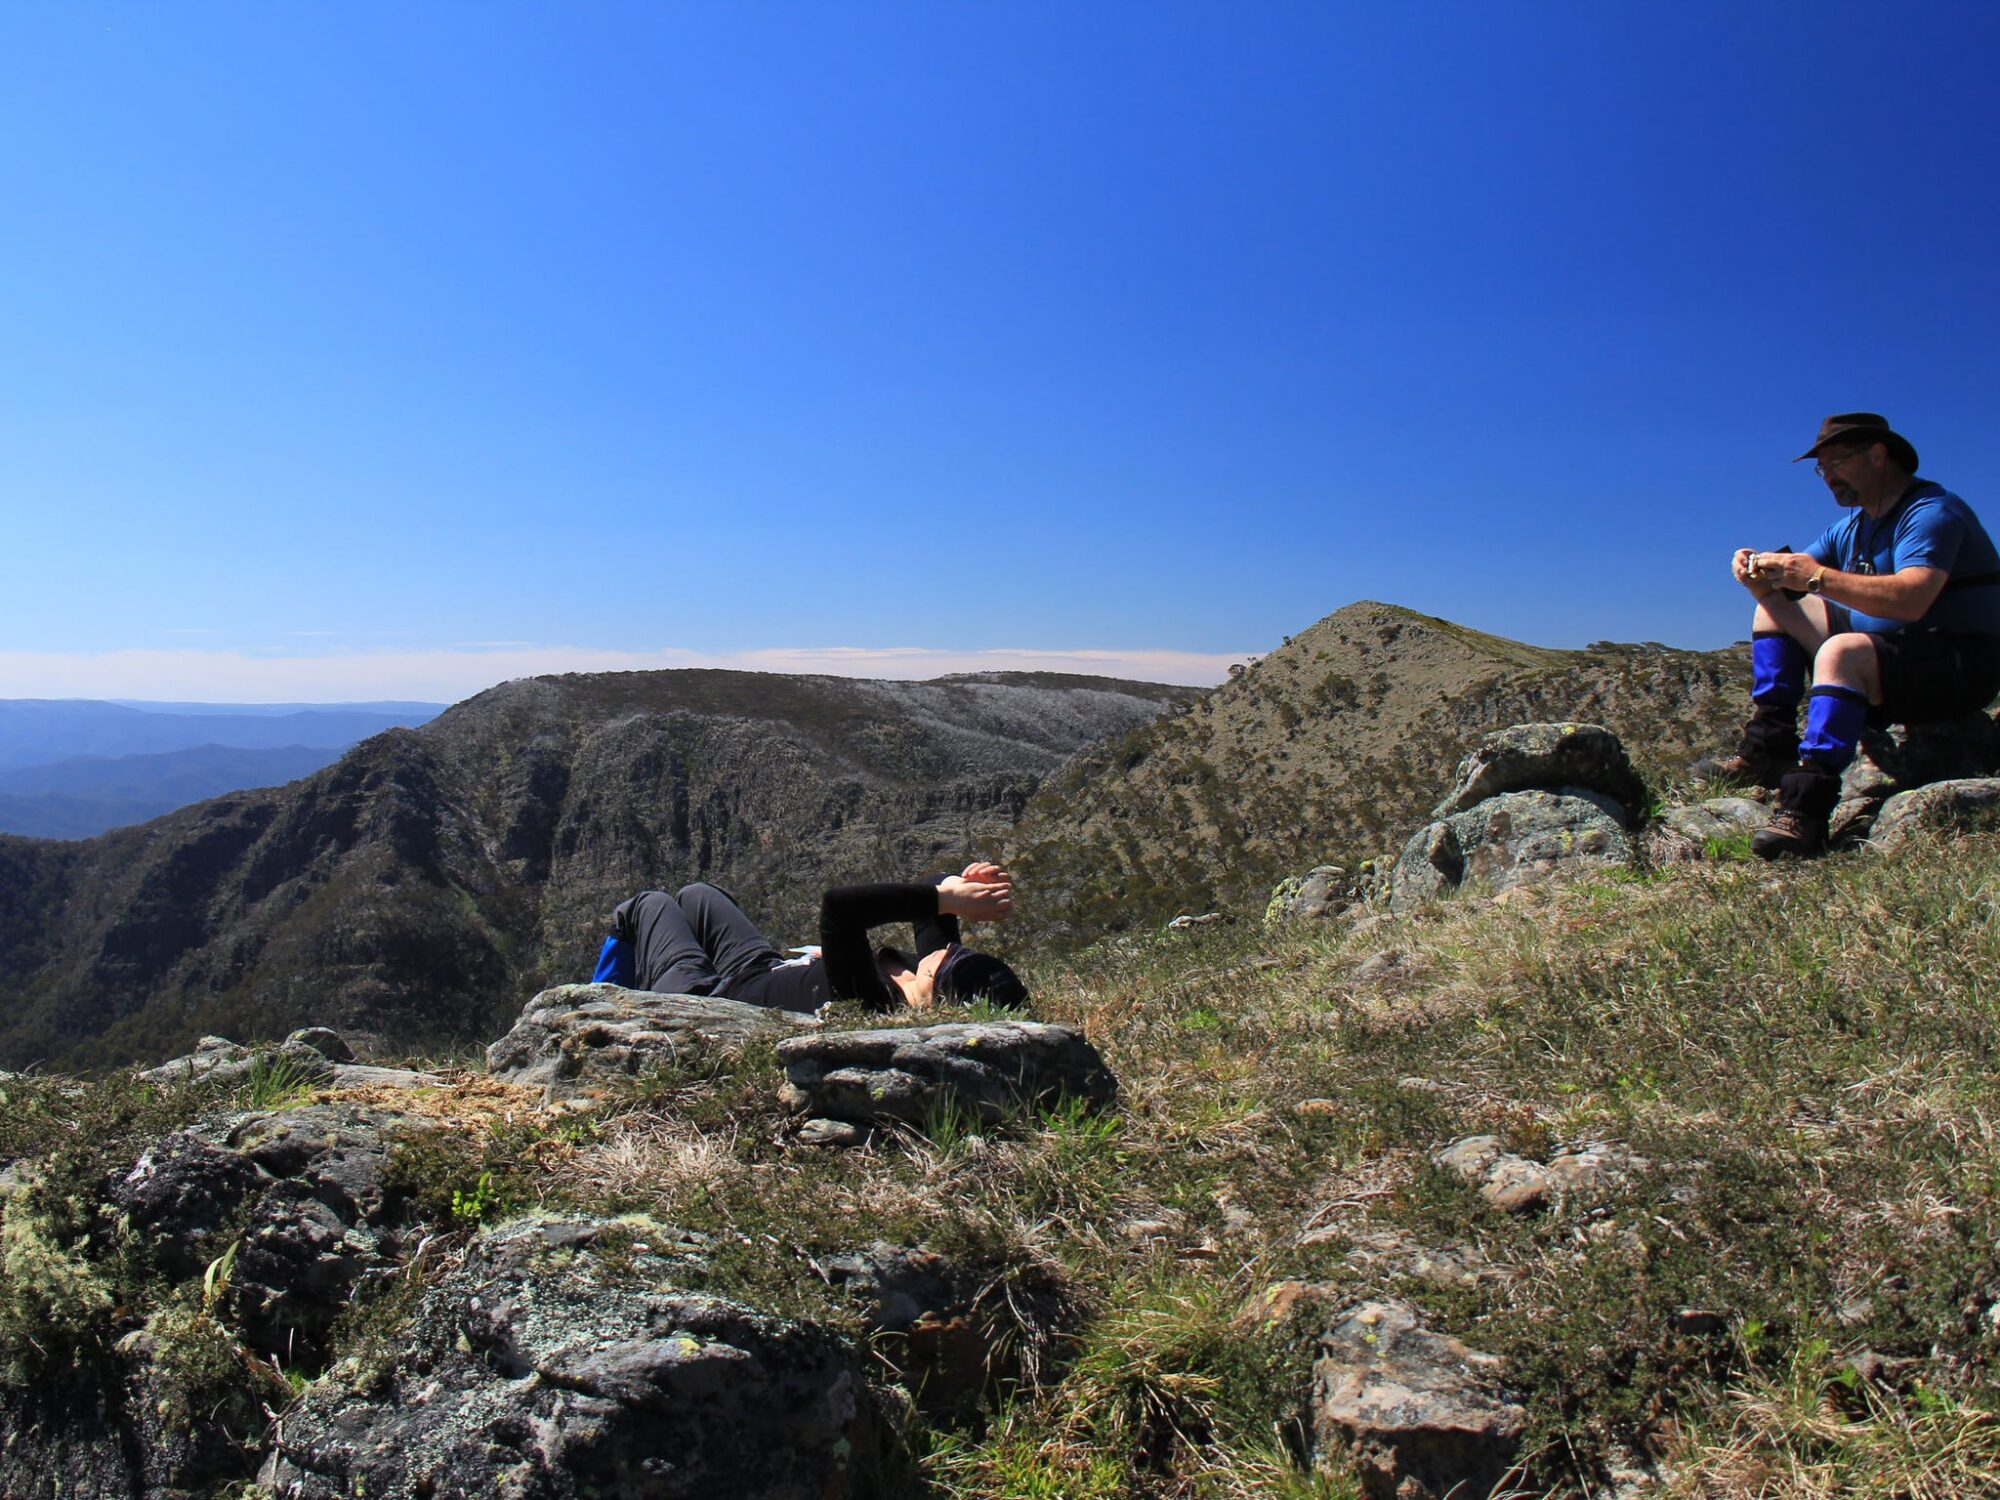 A couple of hikers resting after a big ascent on a saddle between Mt Howitt and The Crosscut Saw.